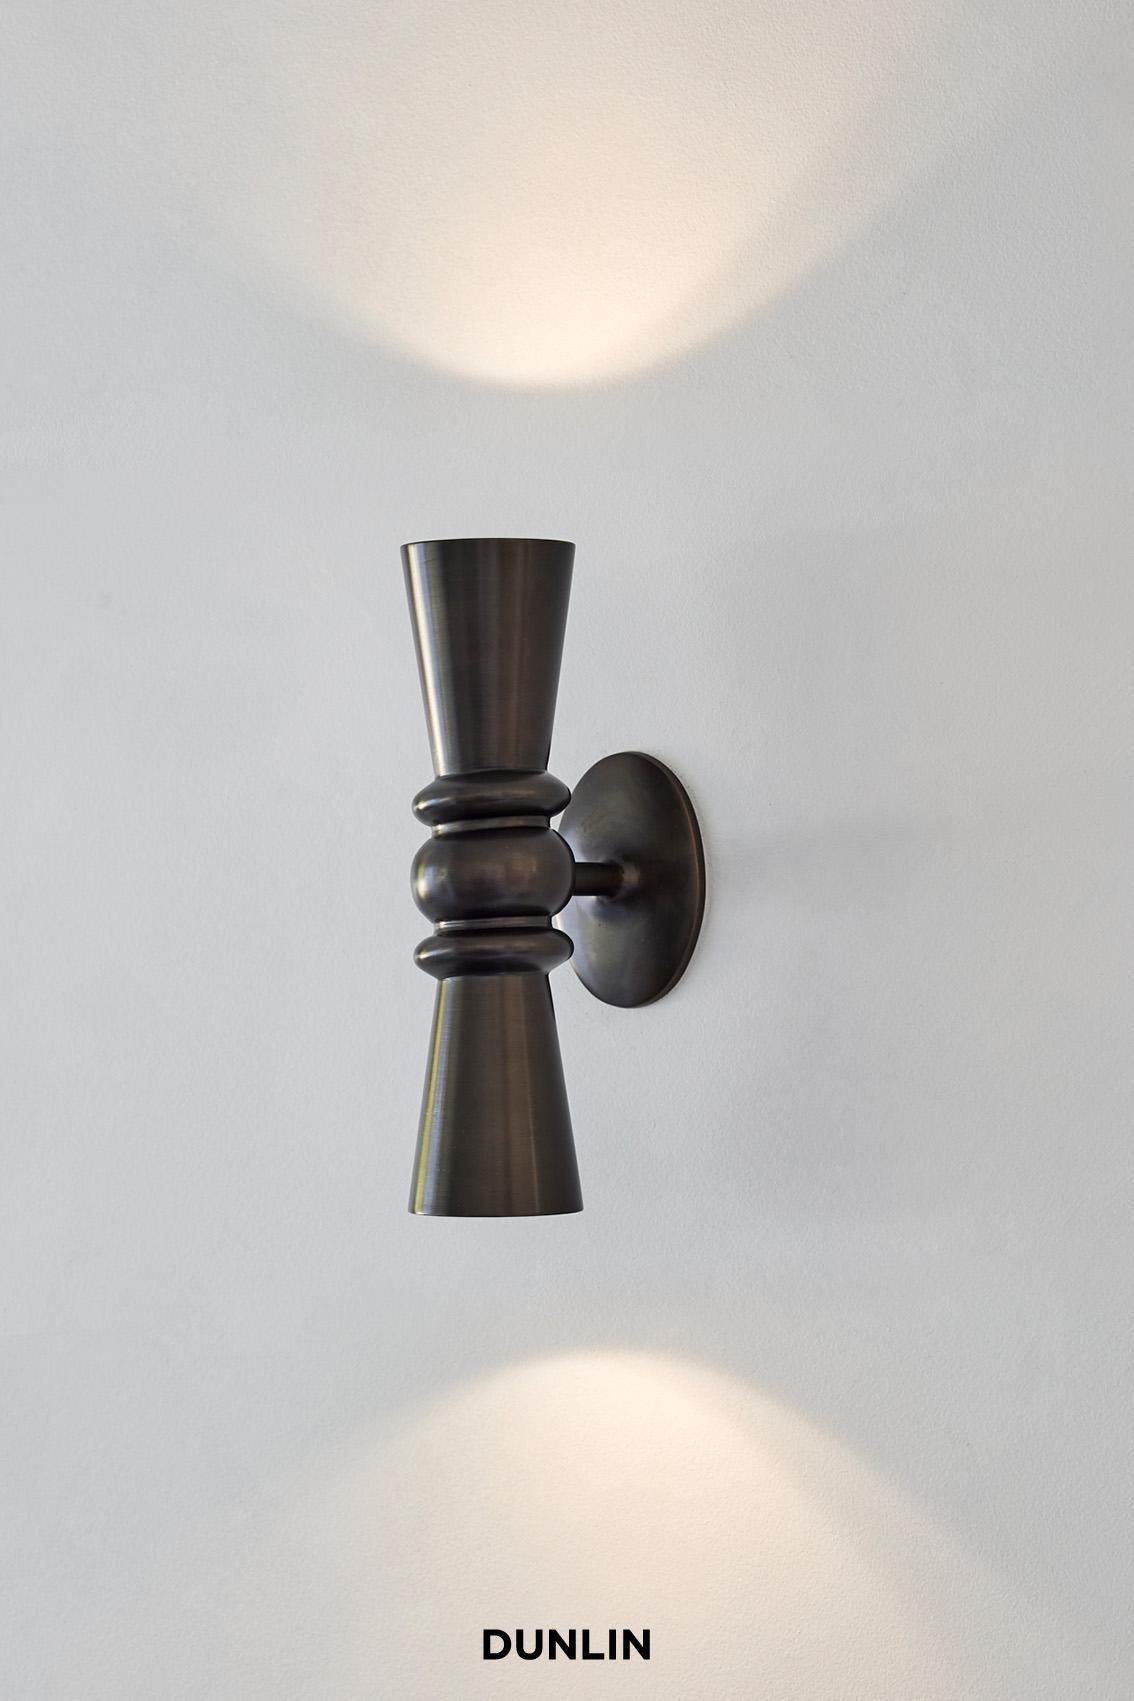 Handmade in solid brass exclusively for Dunlin. 

The Dunlin Germaine Weathered Brass Up-Down Wall Light exudes an elegant and charming presence, adding a touch of sophistication to any living room. Its meticulous craftsmanship, with a keen focus on